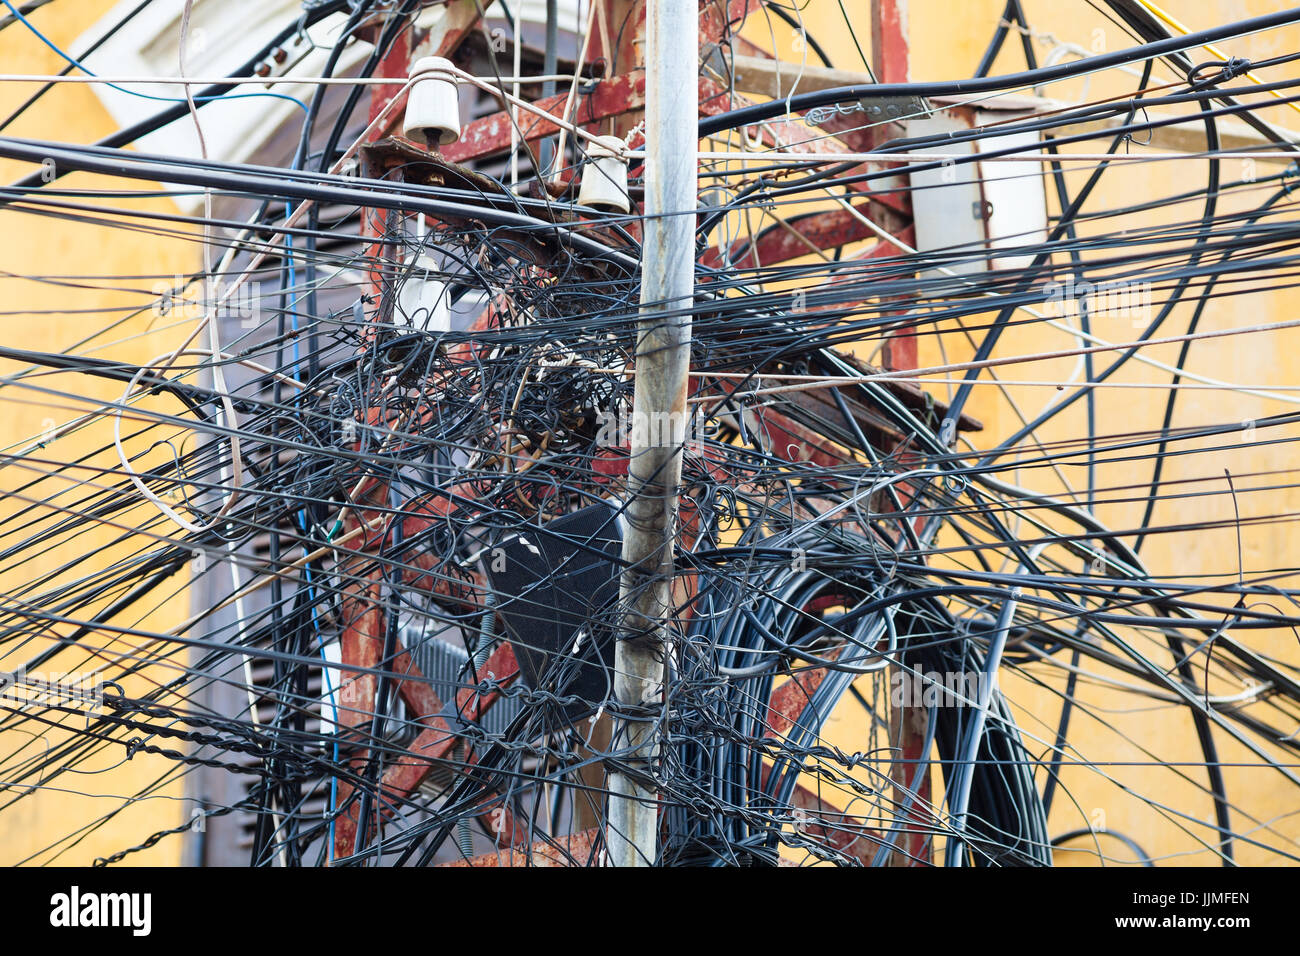 Messy cable infrastructure in Vietnam Stock Photo